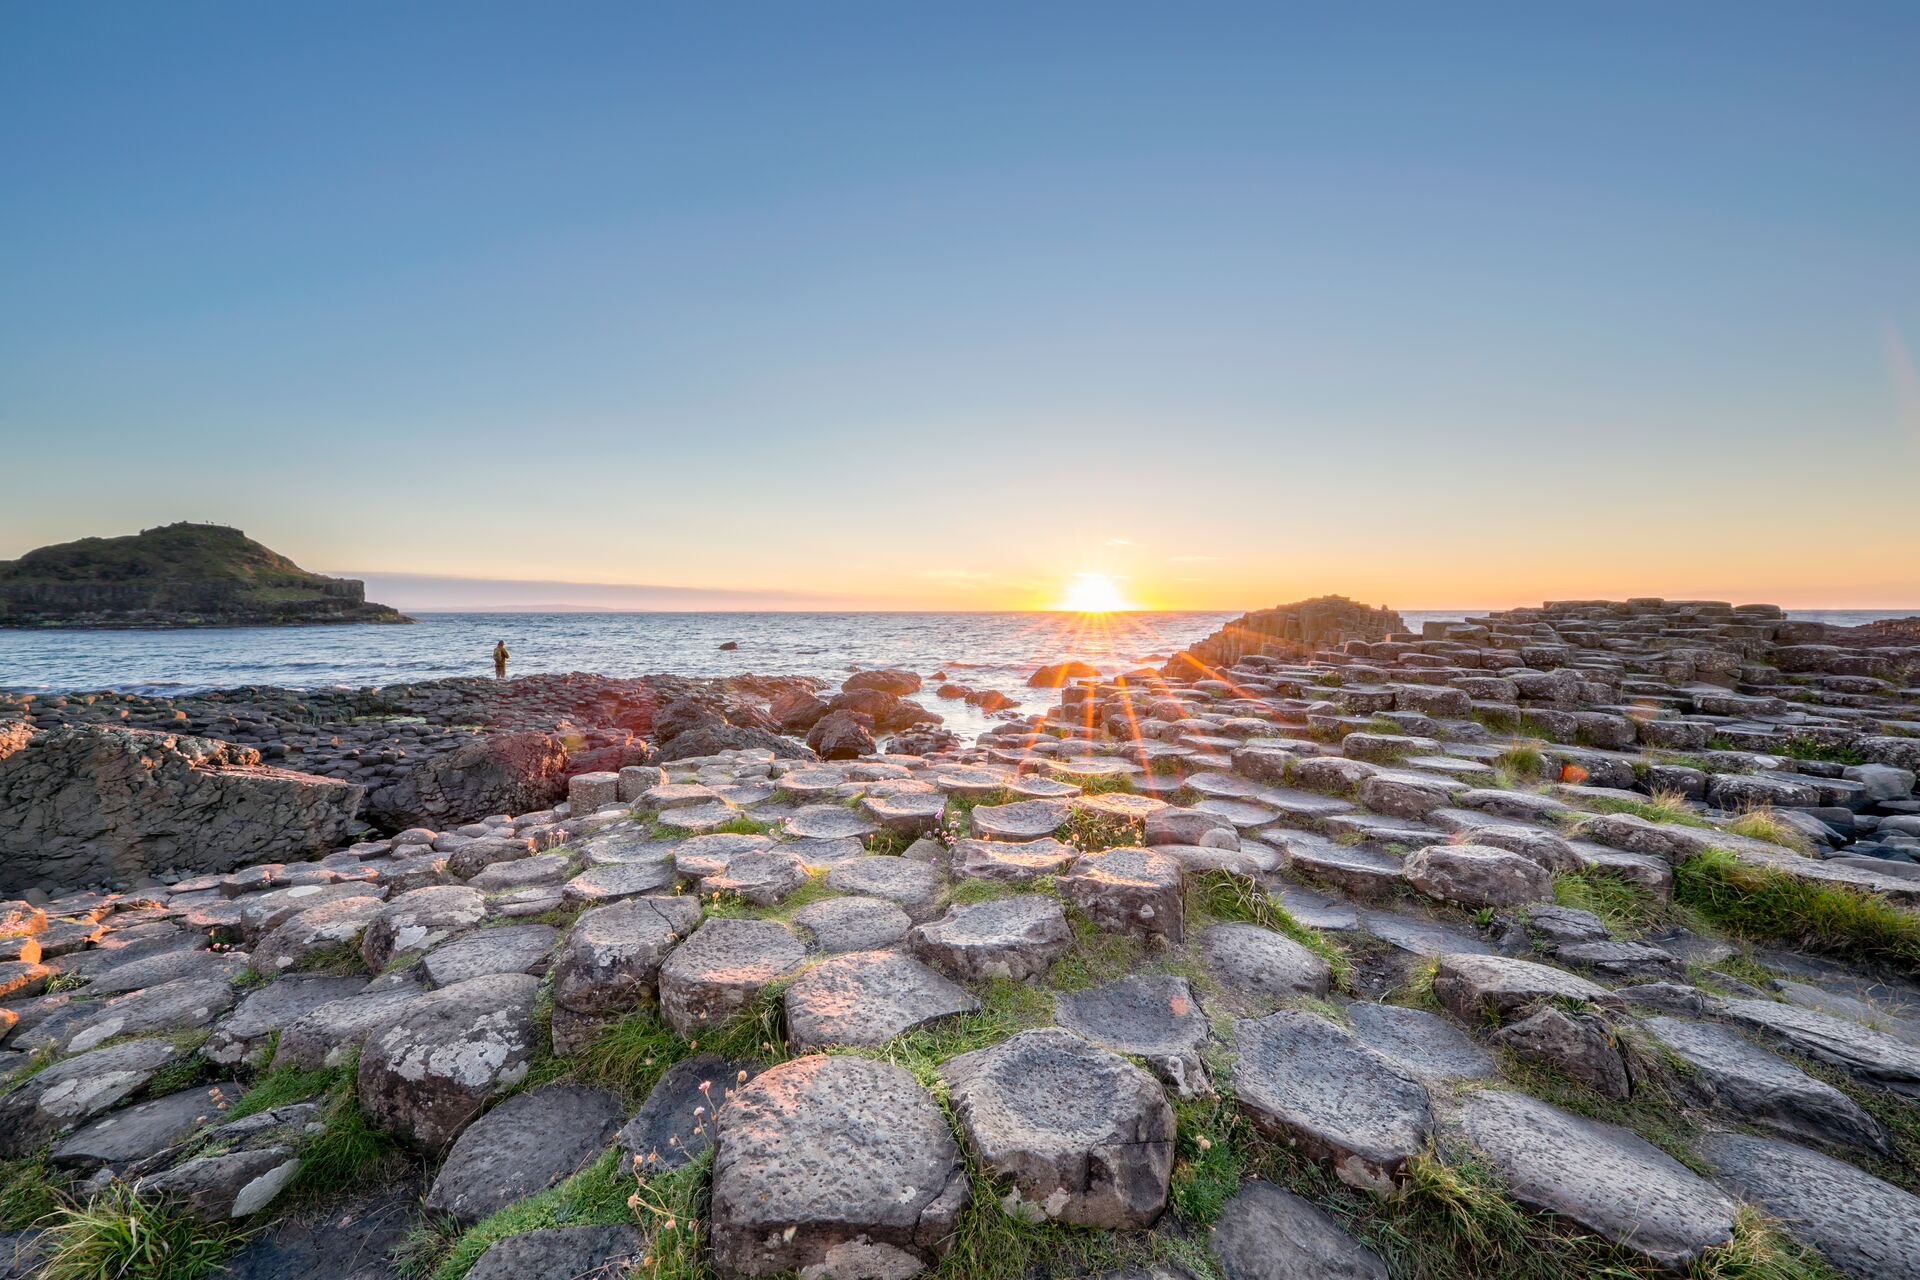 The hexagonal columns of the Giant’s Causeway are framed by a backdrop of se and the sun rising